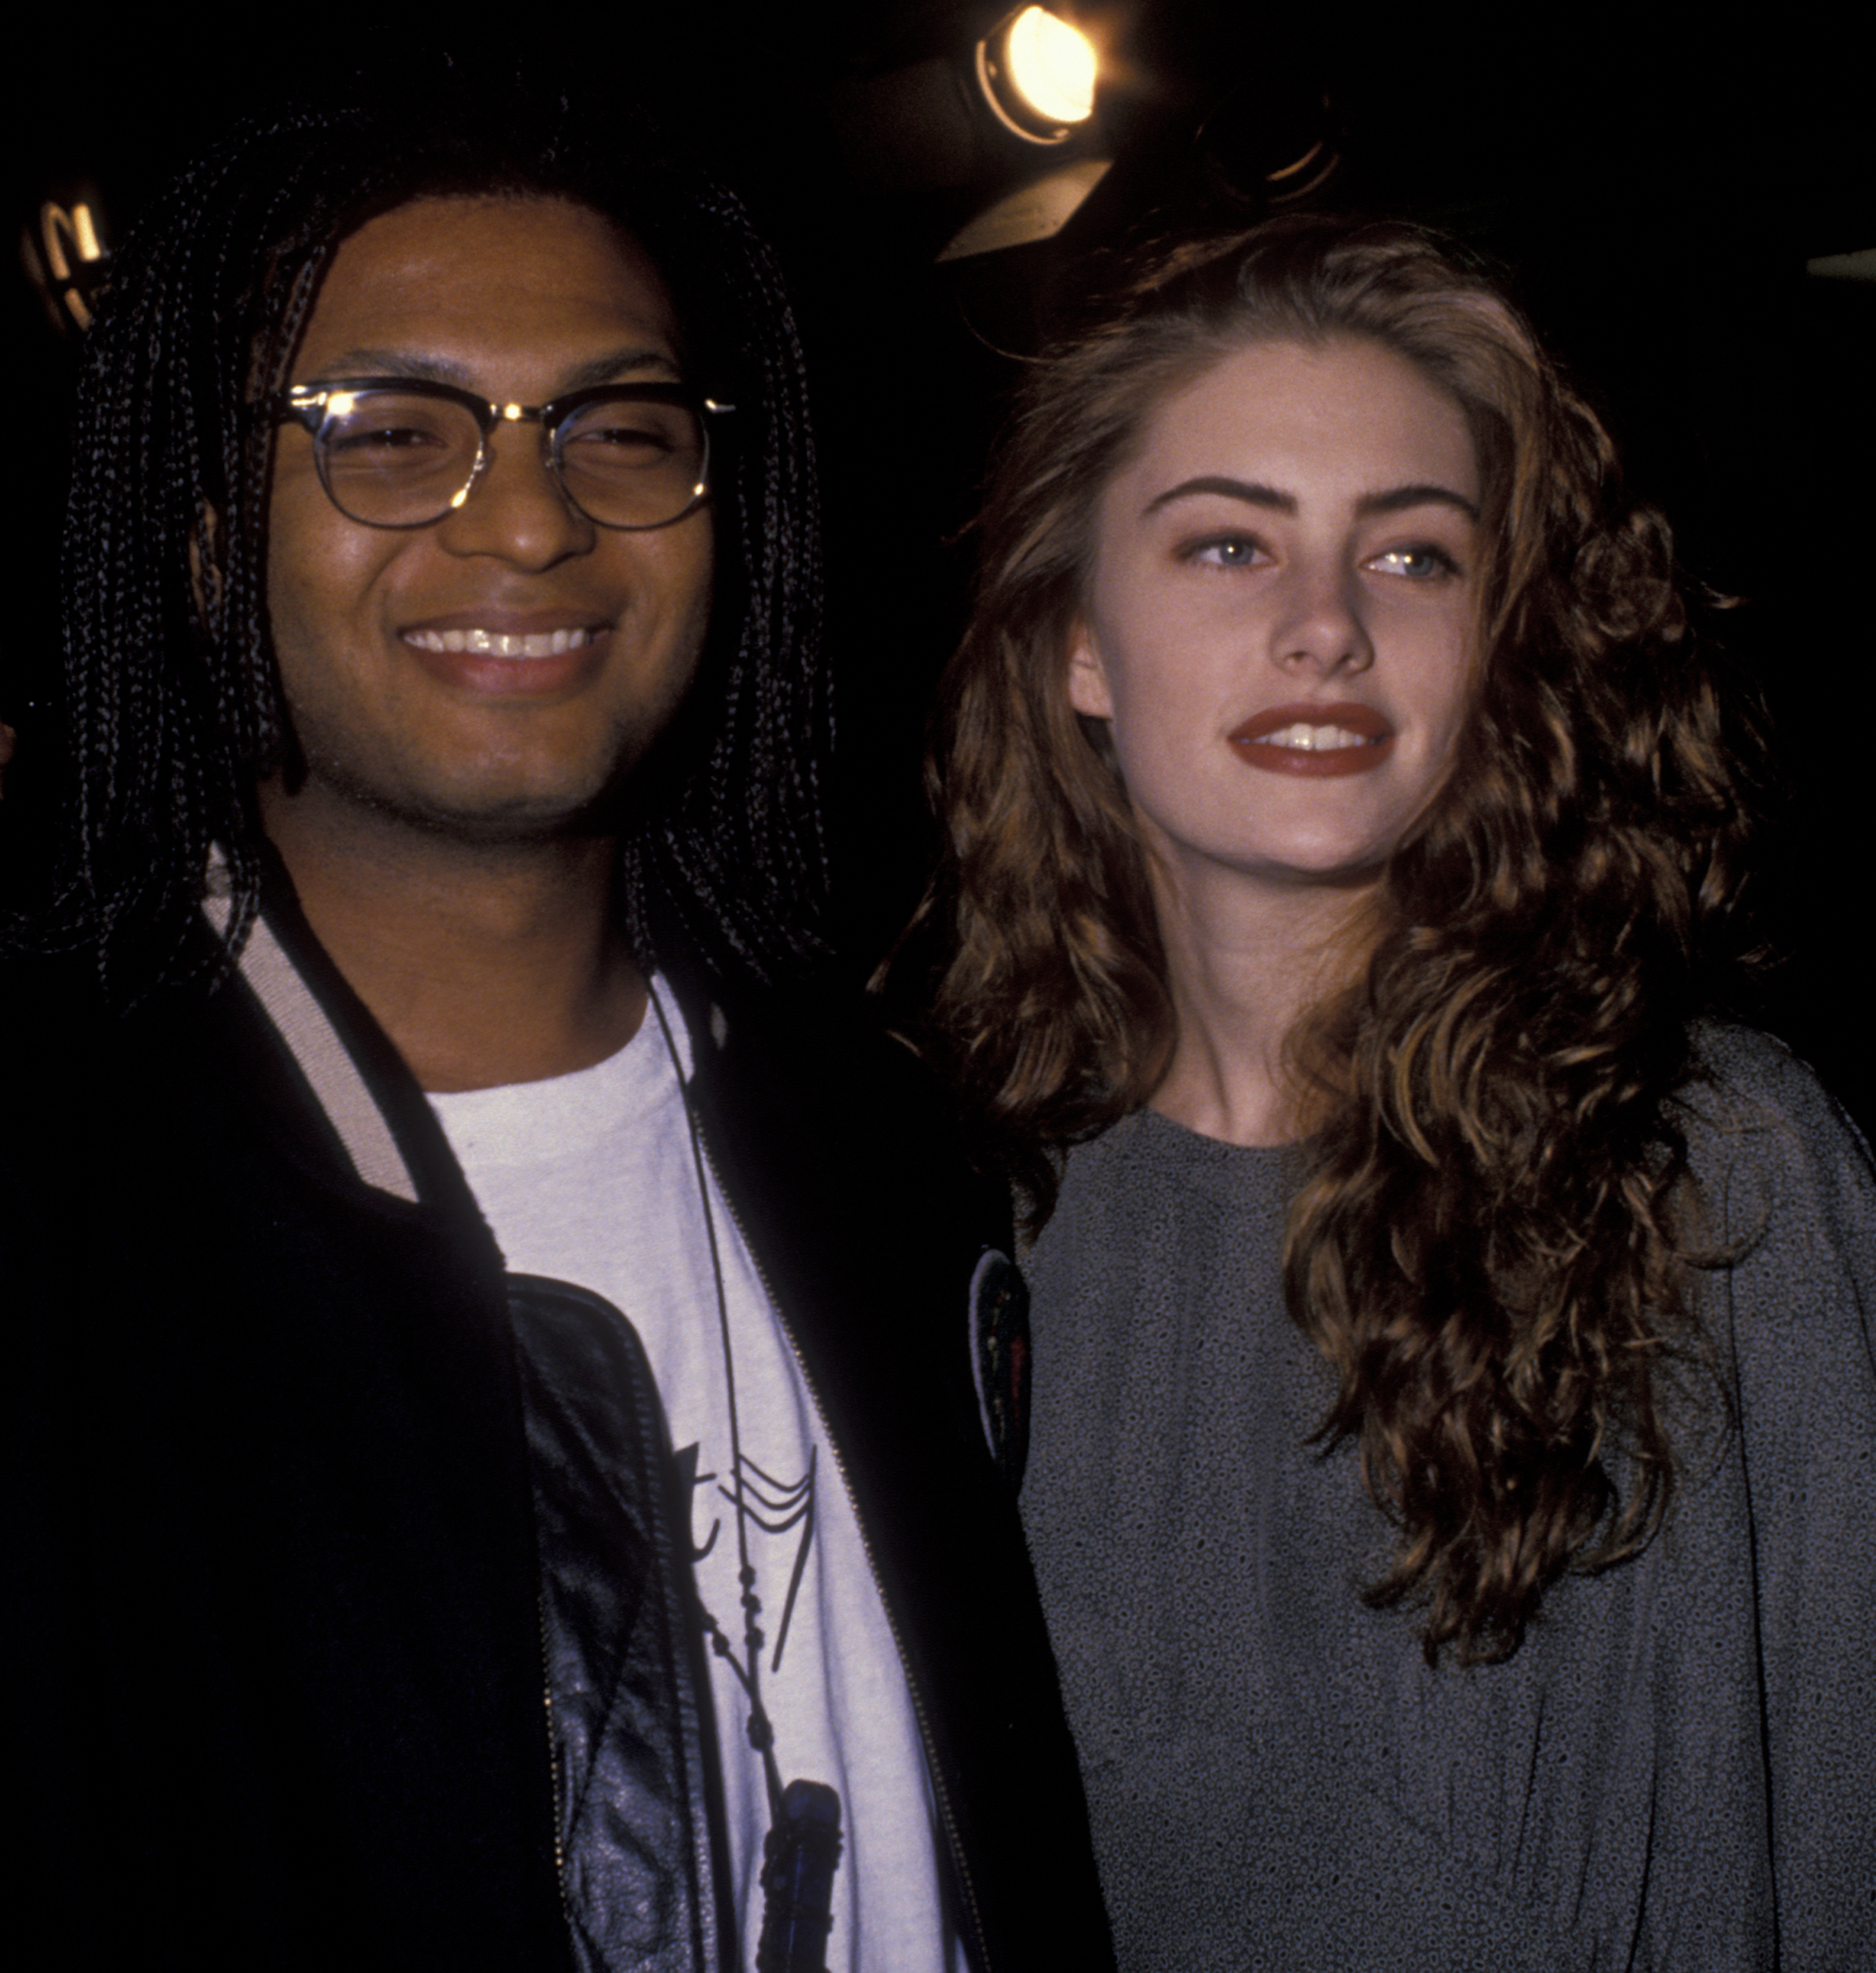 David Alexis and Mädchen Amick attend "Marked For Death" on October 4, 1990, at Mann National Theate,r in Westwood, California. | Source: Getty Images